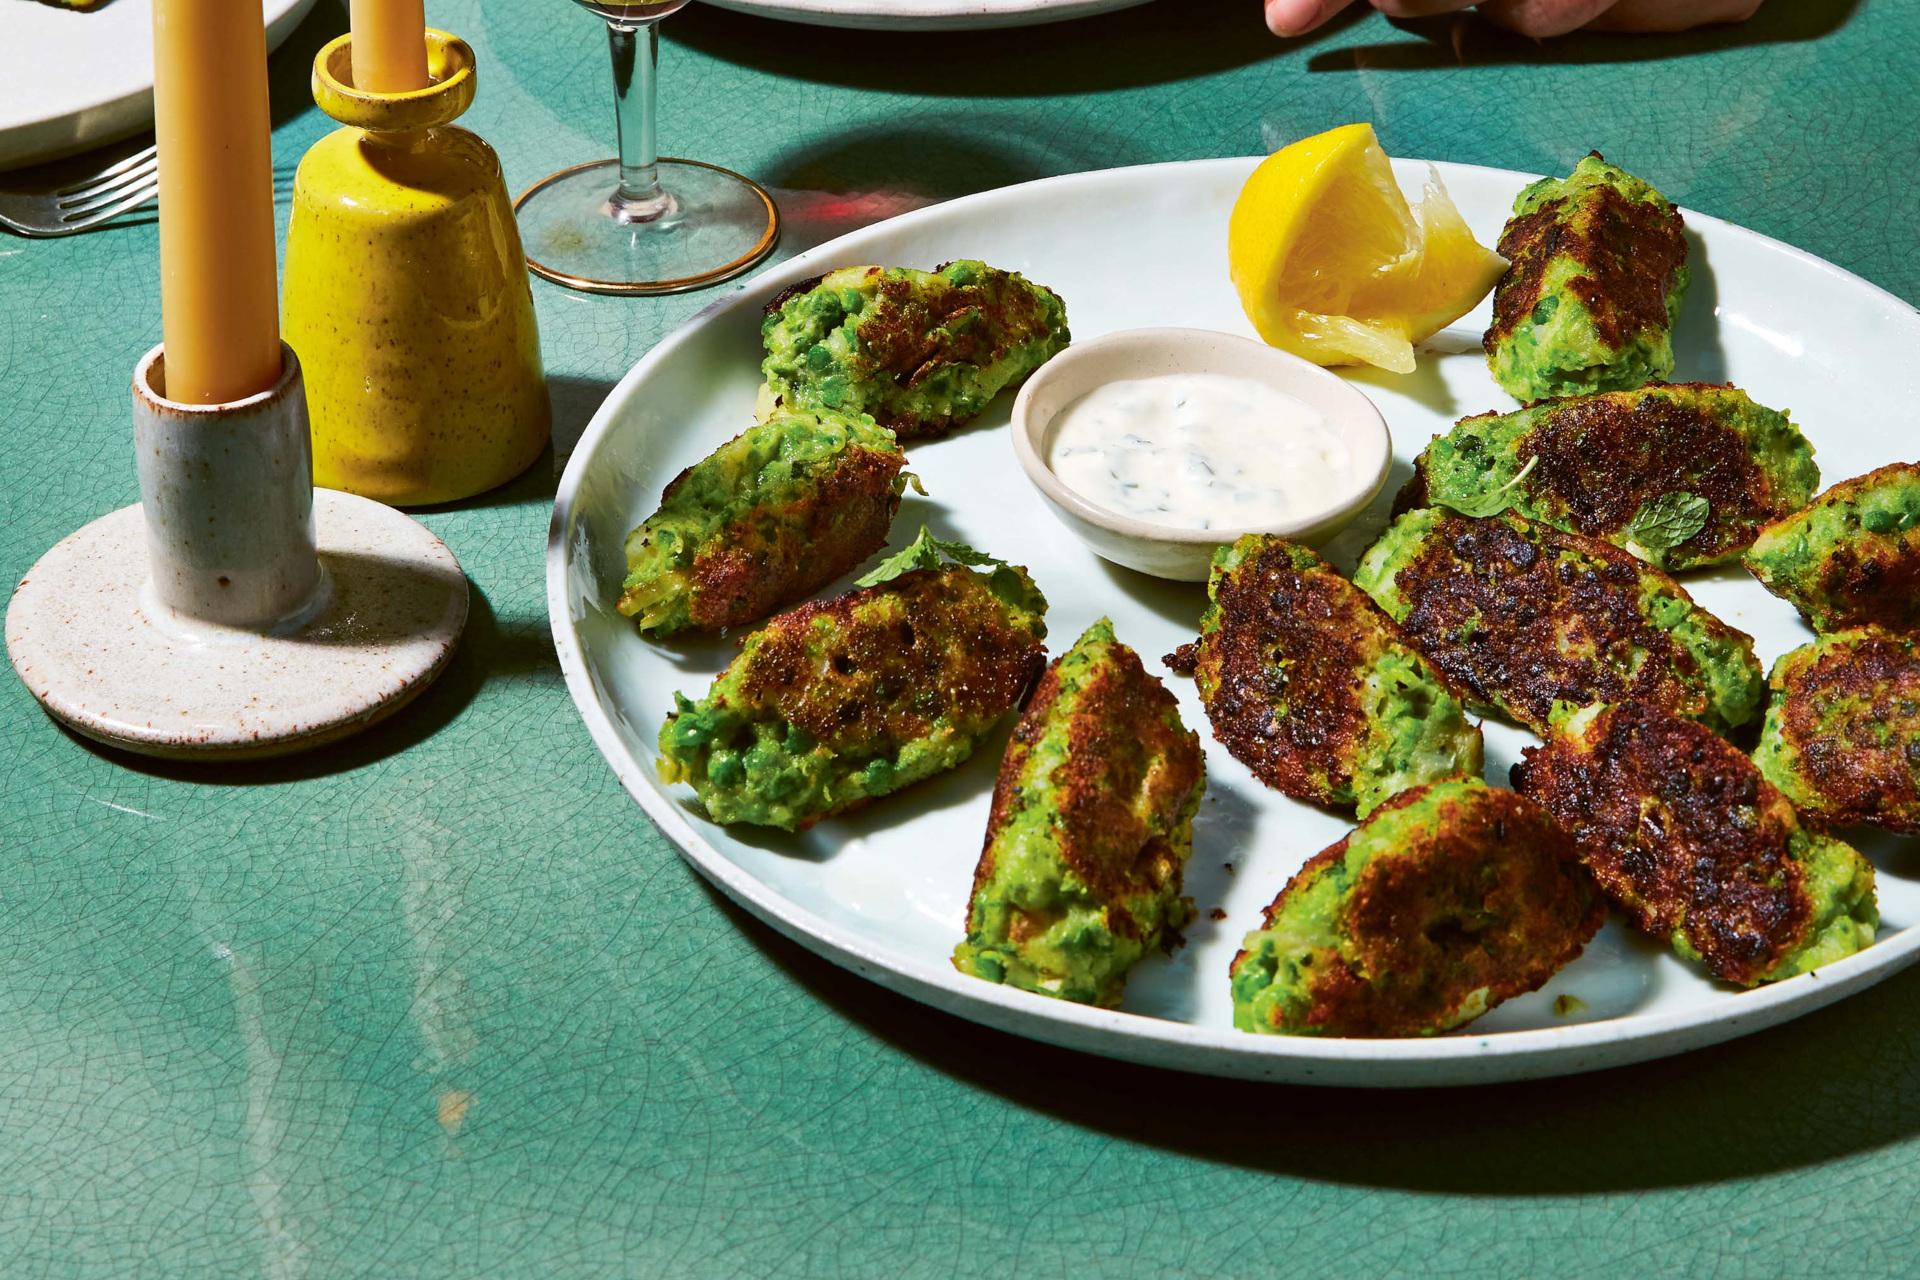 Pea & Mint Fritters with Garlic Mayo